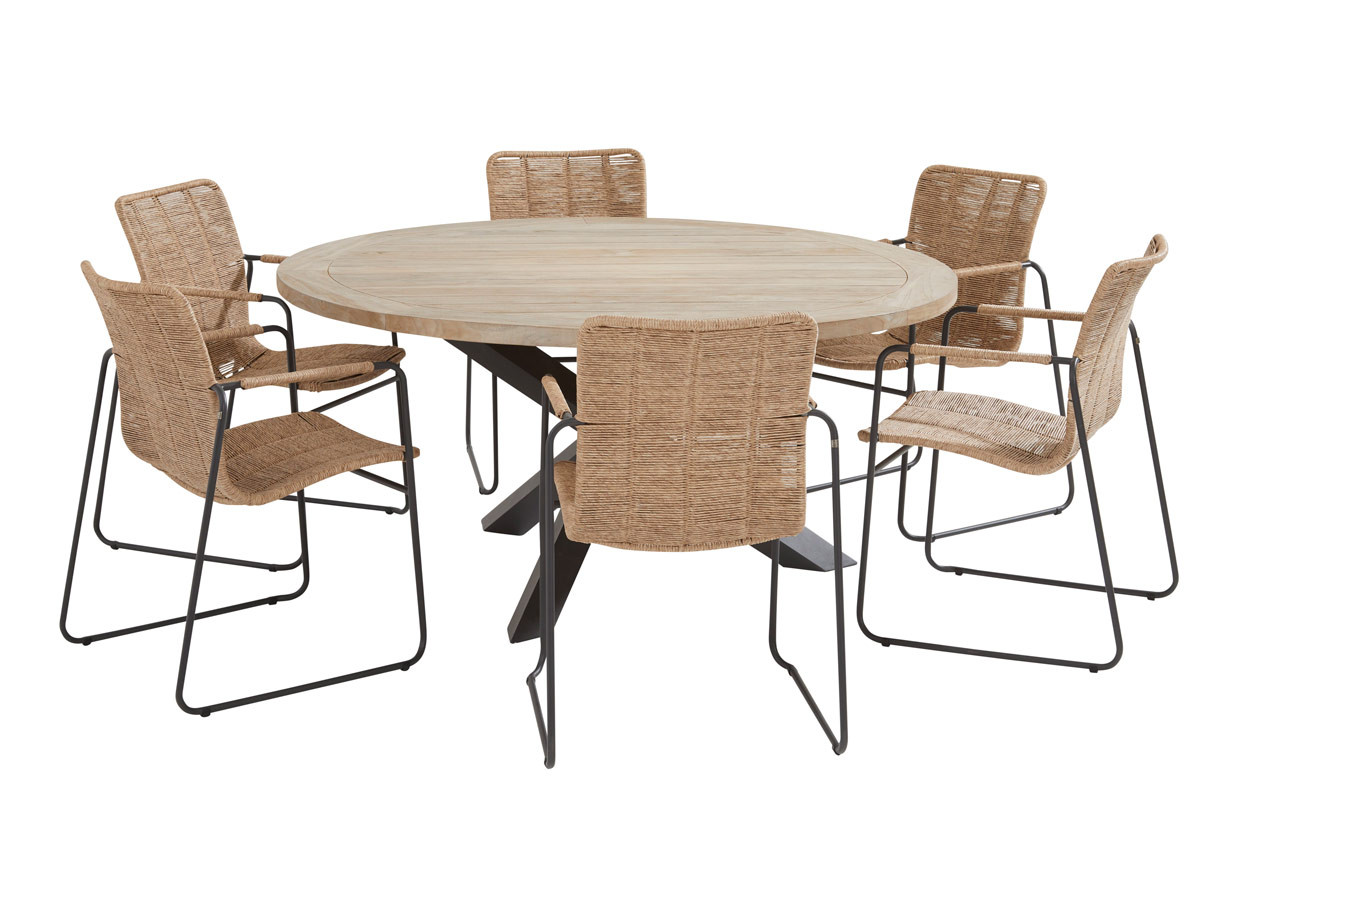 Palma natural dining set with round Louvre table 160 cm